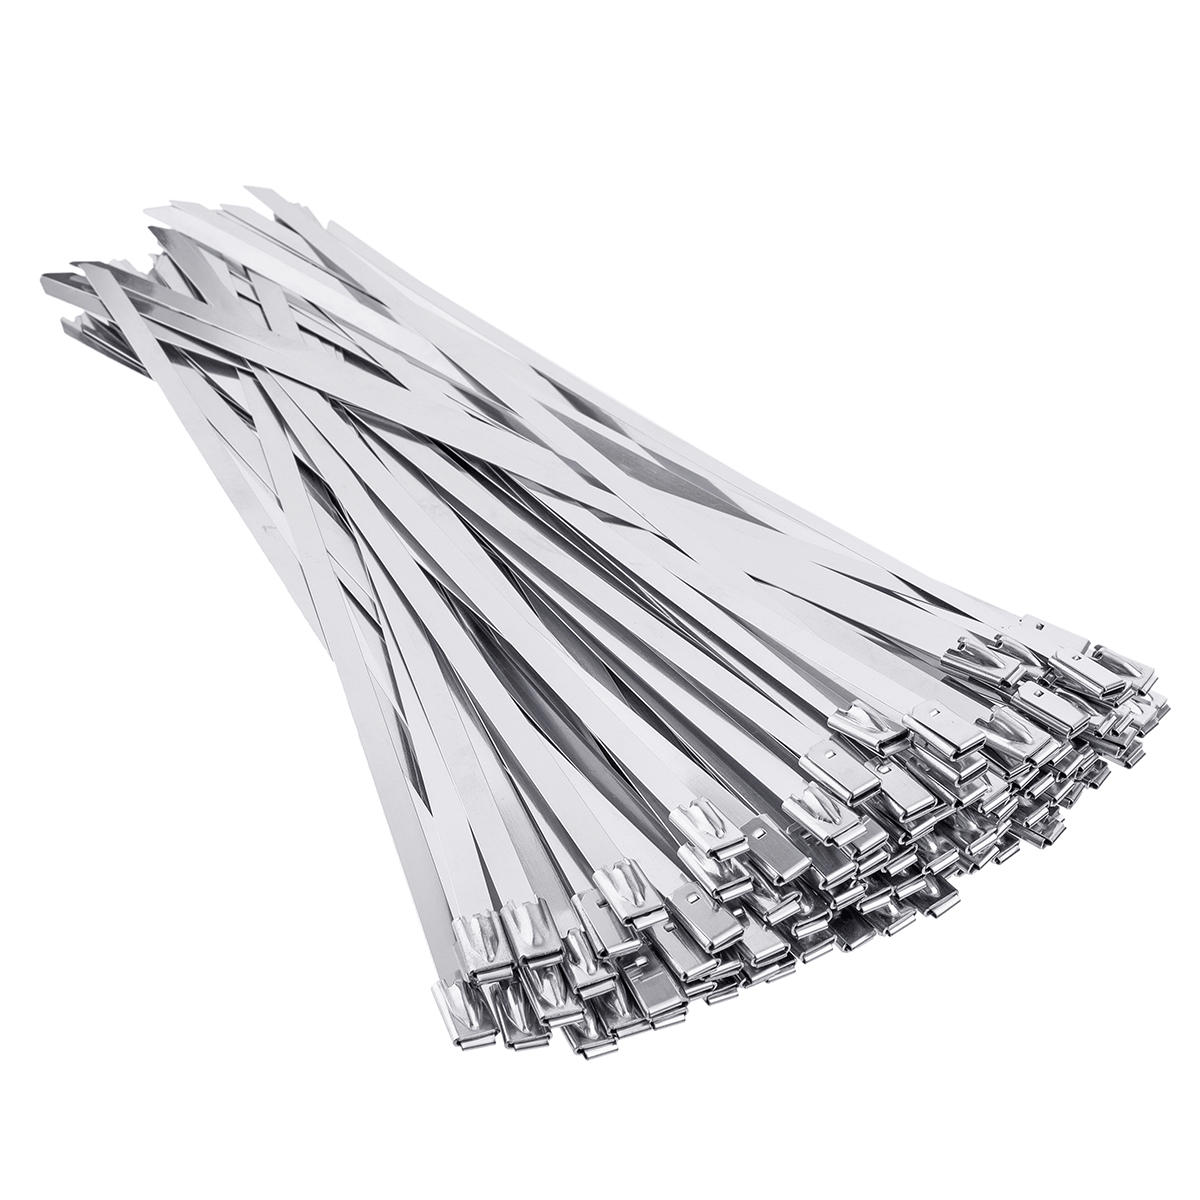 

100Pcs 4.6x200mm Stainless Steel Zip Tie Exhaust Wrap Coated Locking Cable Ties